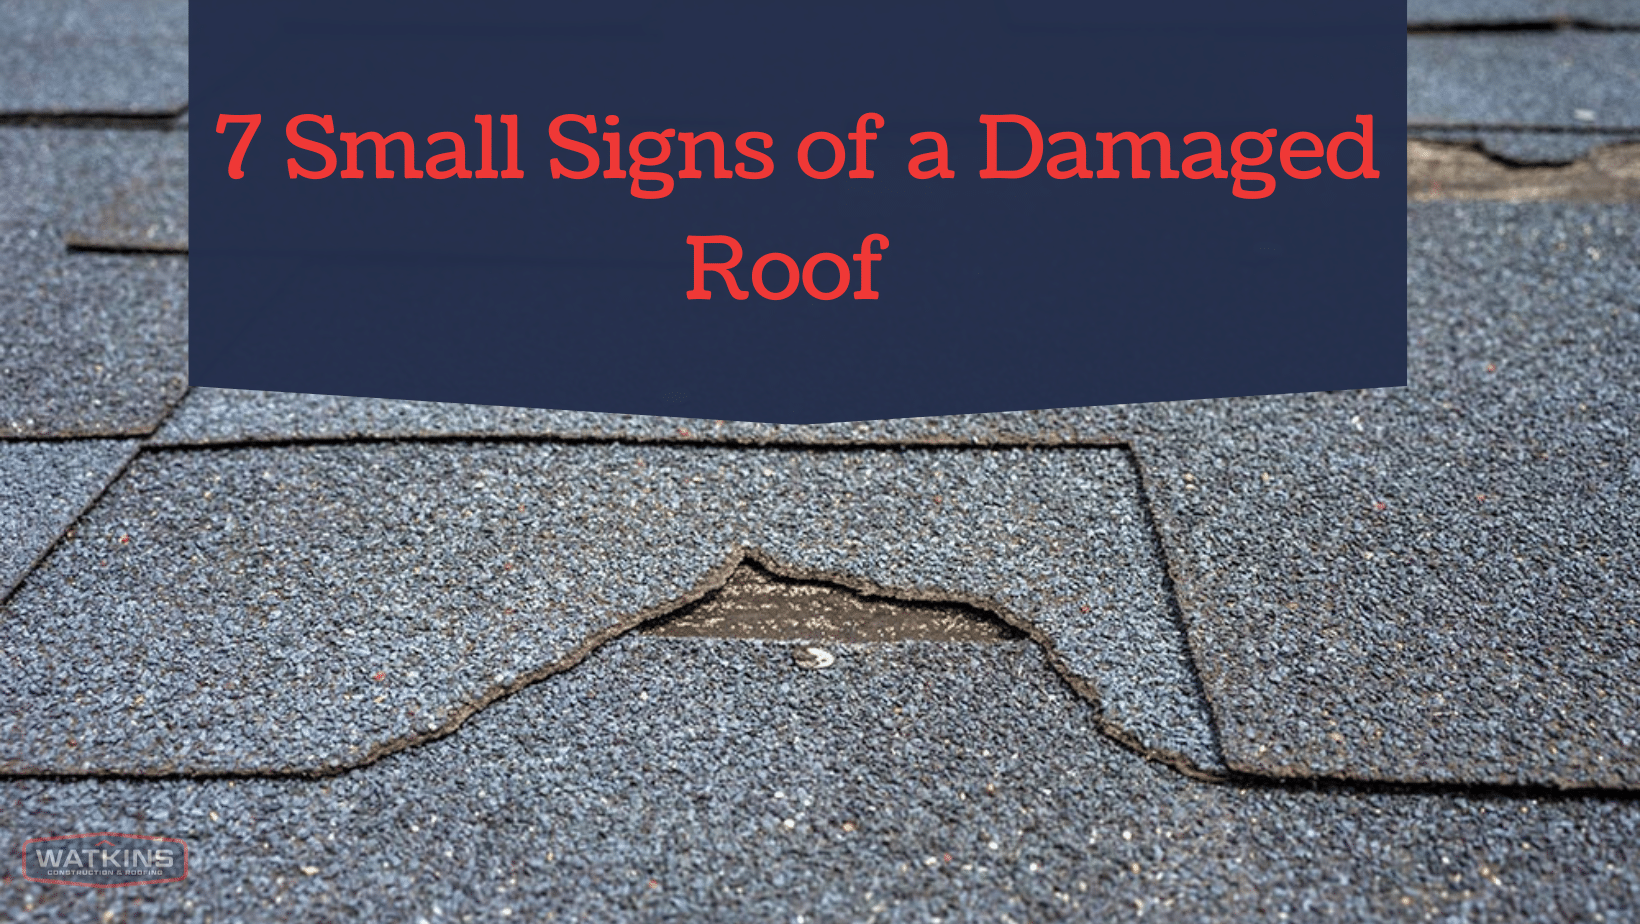 7-Small-Signs-of-a-Damaged-Roof 